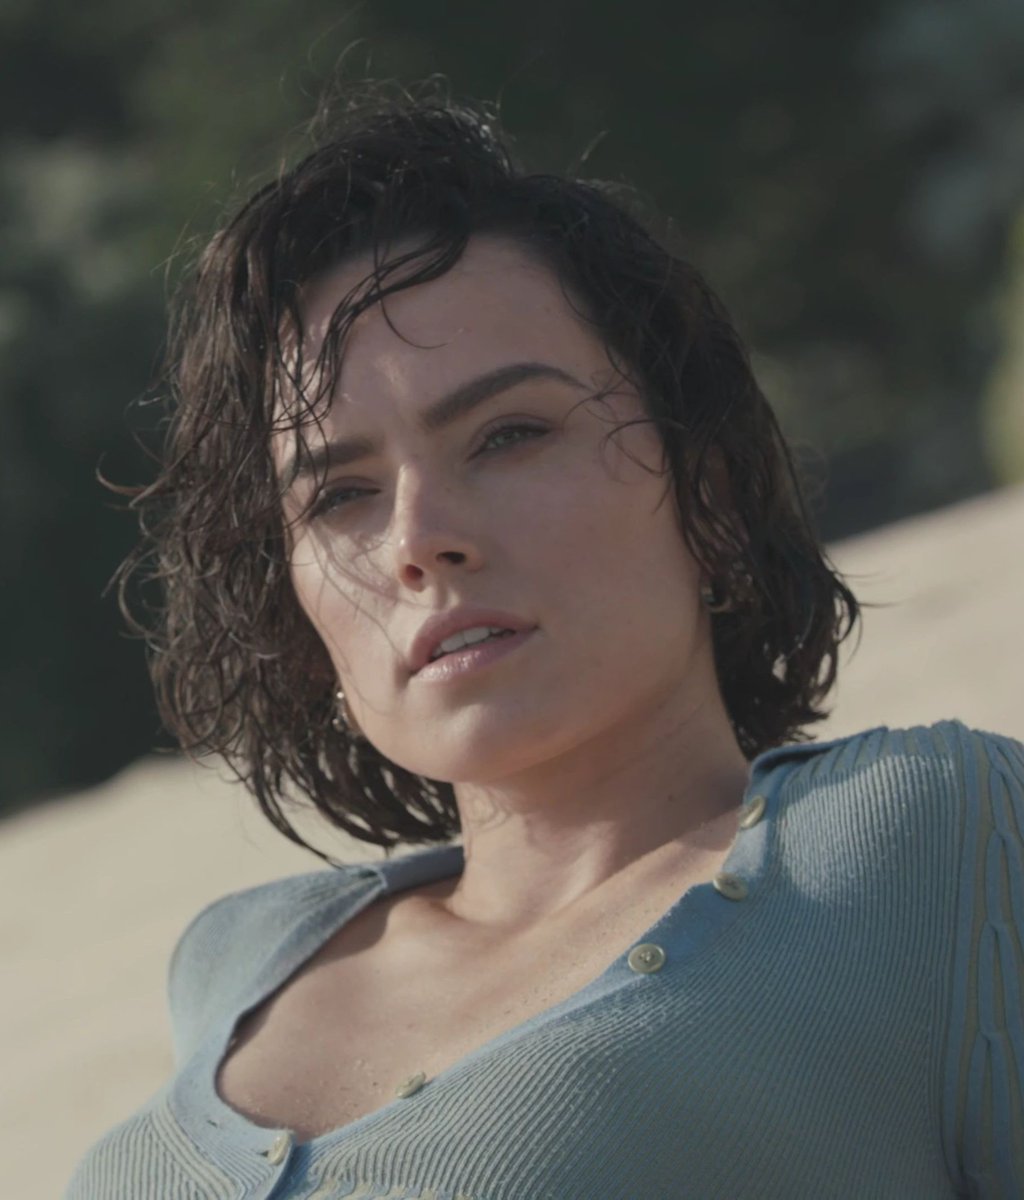 Daisy Ridley collarbones appreciation thread: because I saw Rey twitter going crazy over them 